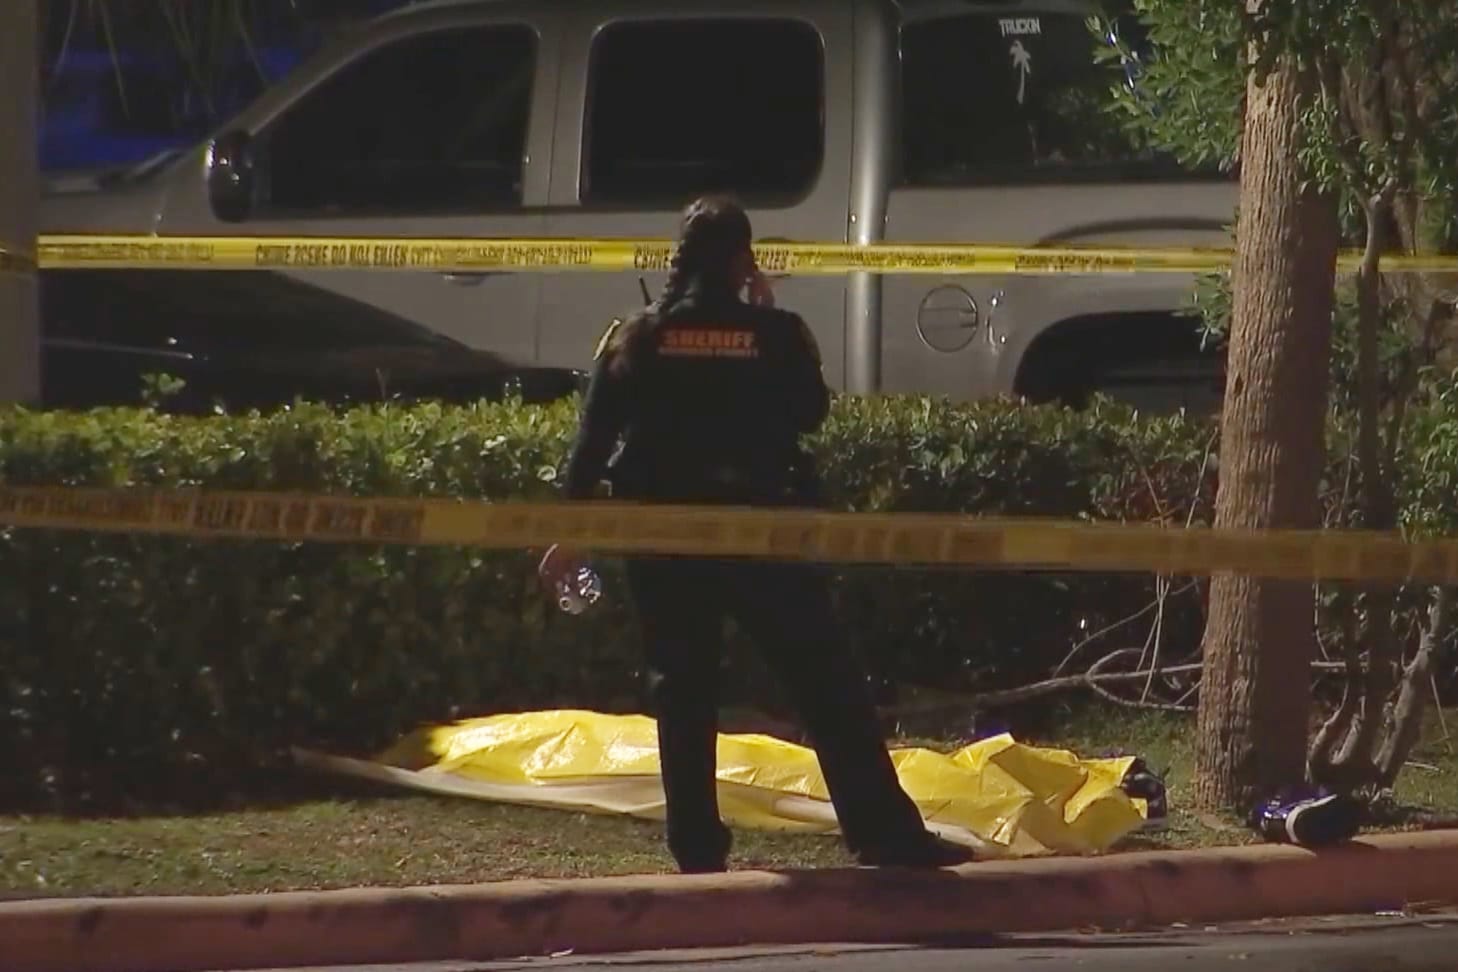 Shooting near Sexyy Red video set in Florida leaves 1 dead, 1 hospitalized